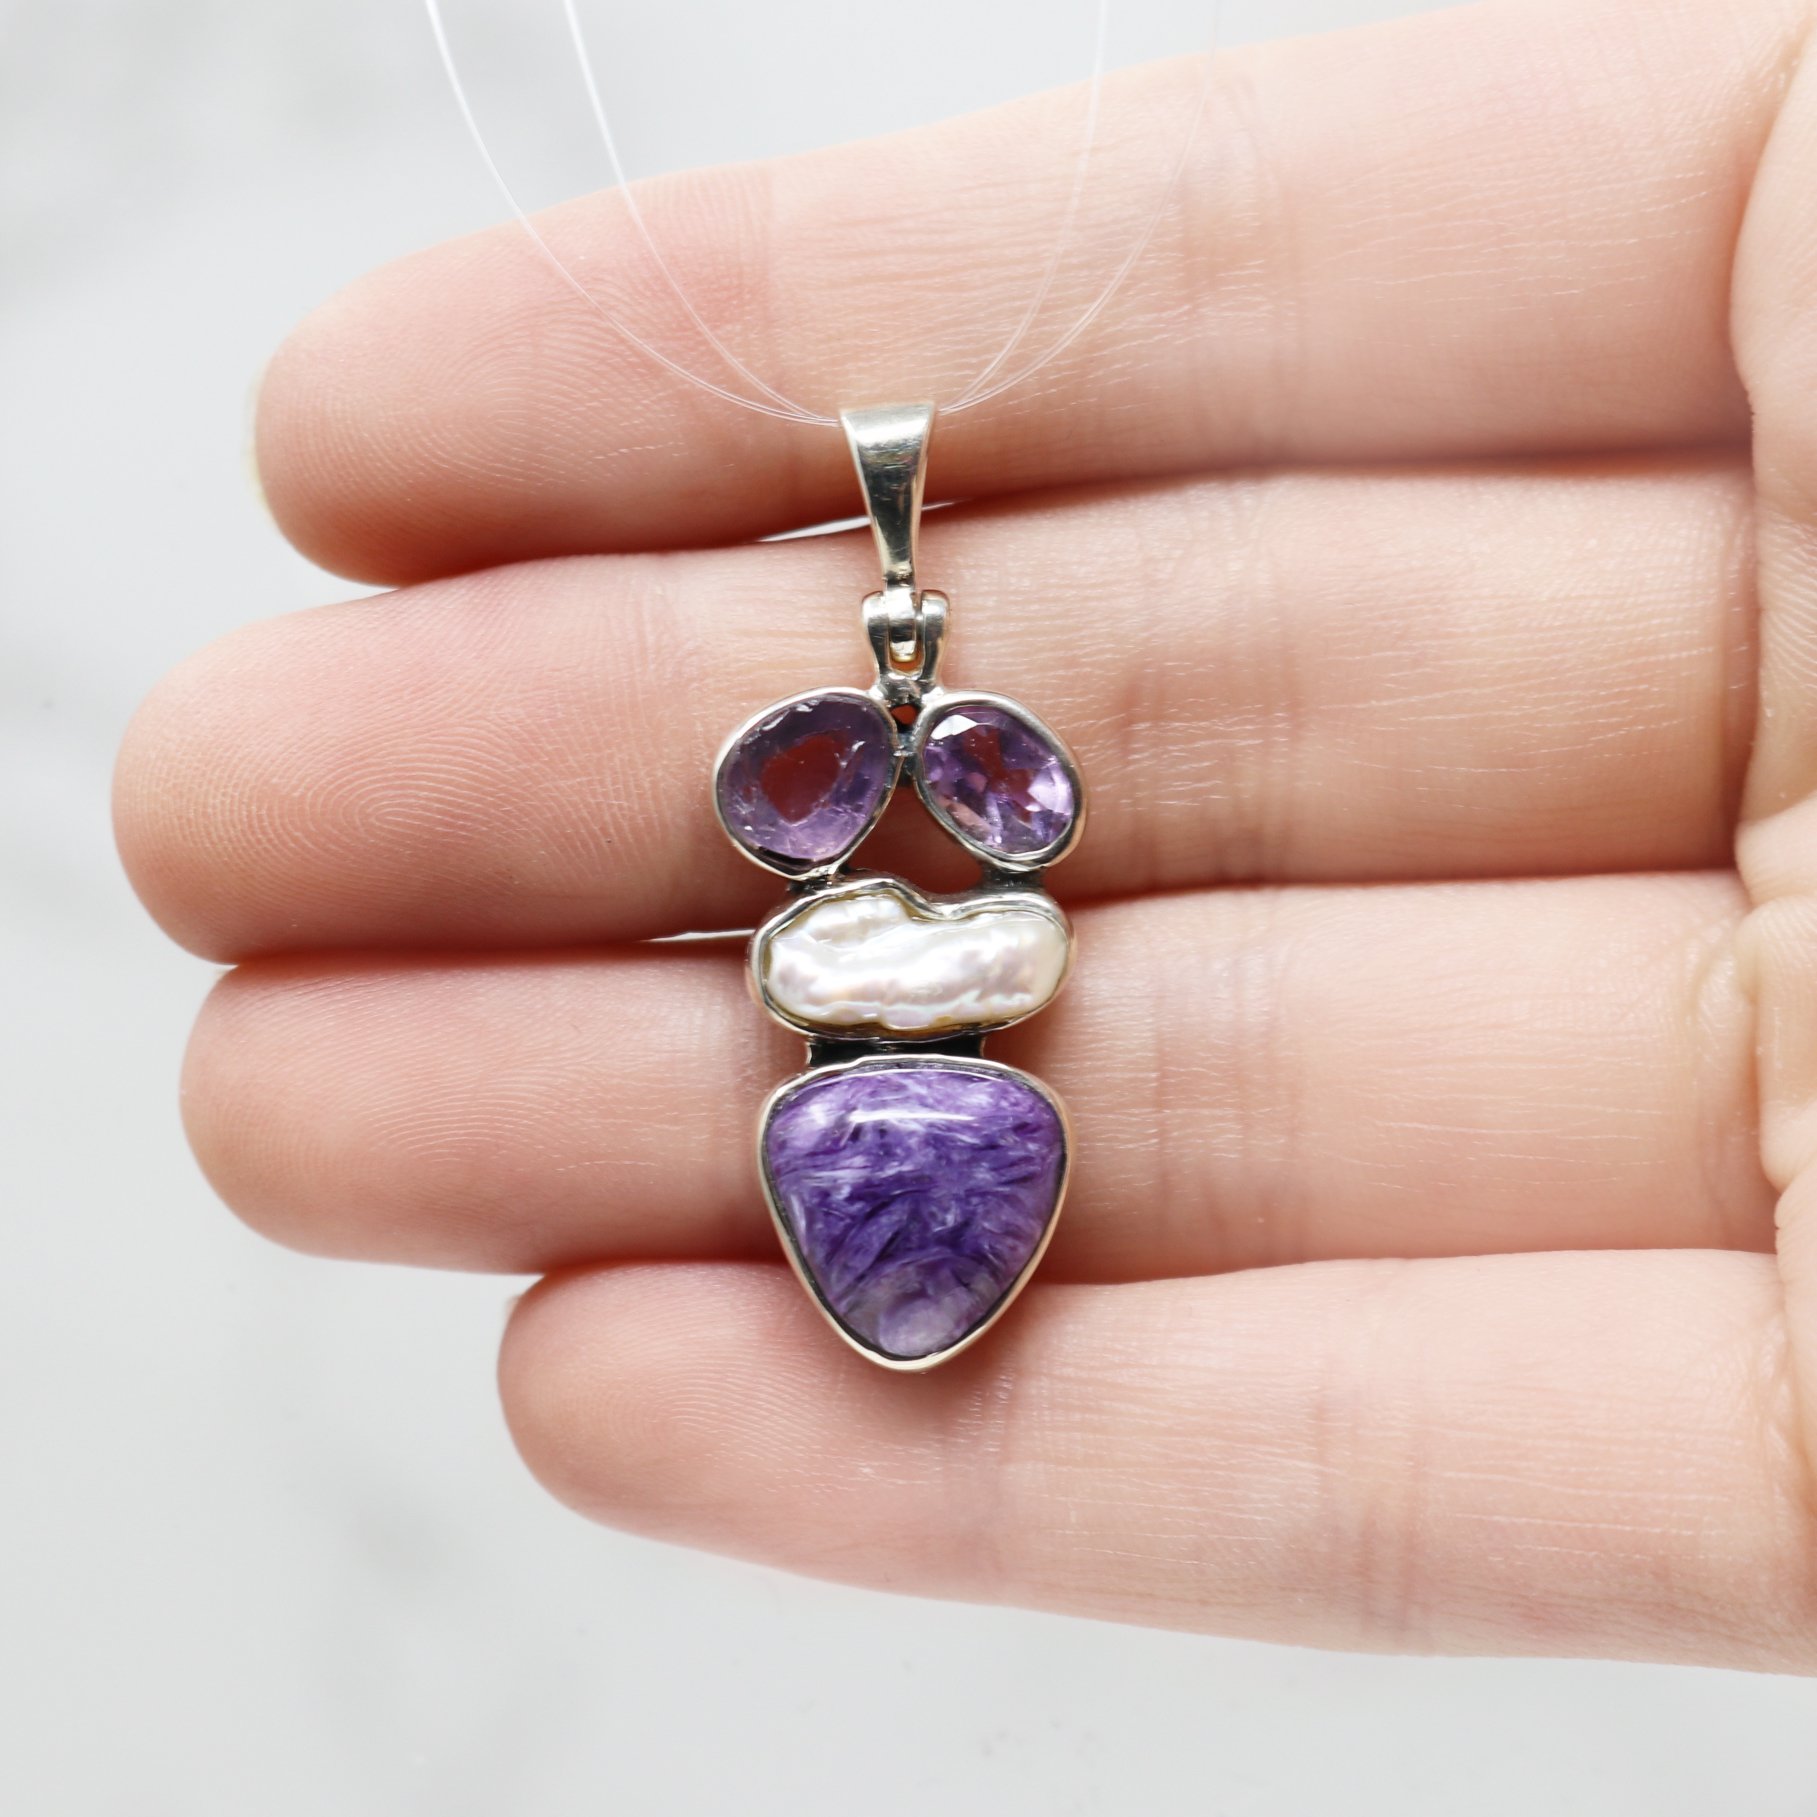 Charoite Pendant - Triangular Cabochon With Faceted & Rough Amethyst Ovals & Freshwater Pearl With 925 Sterling Silver Bezels